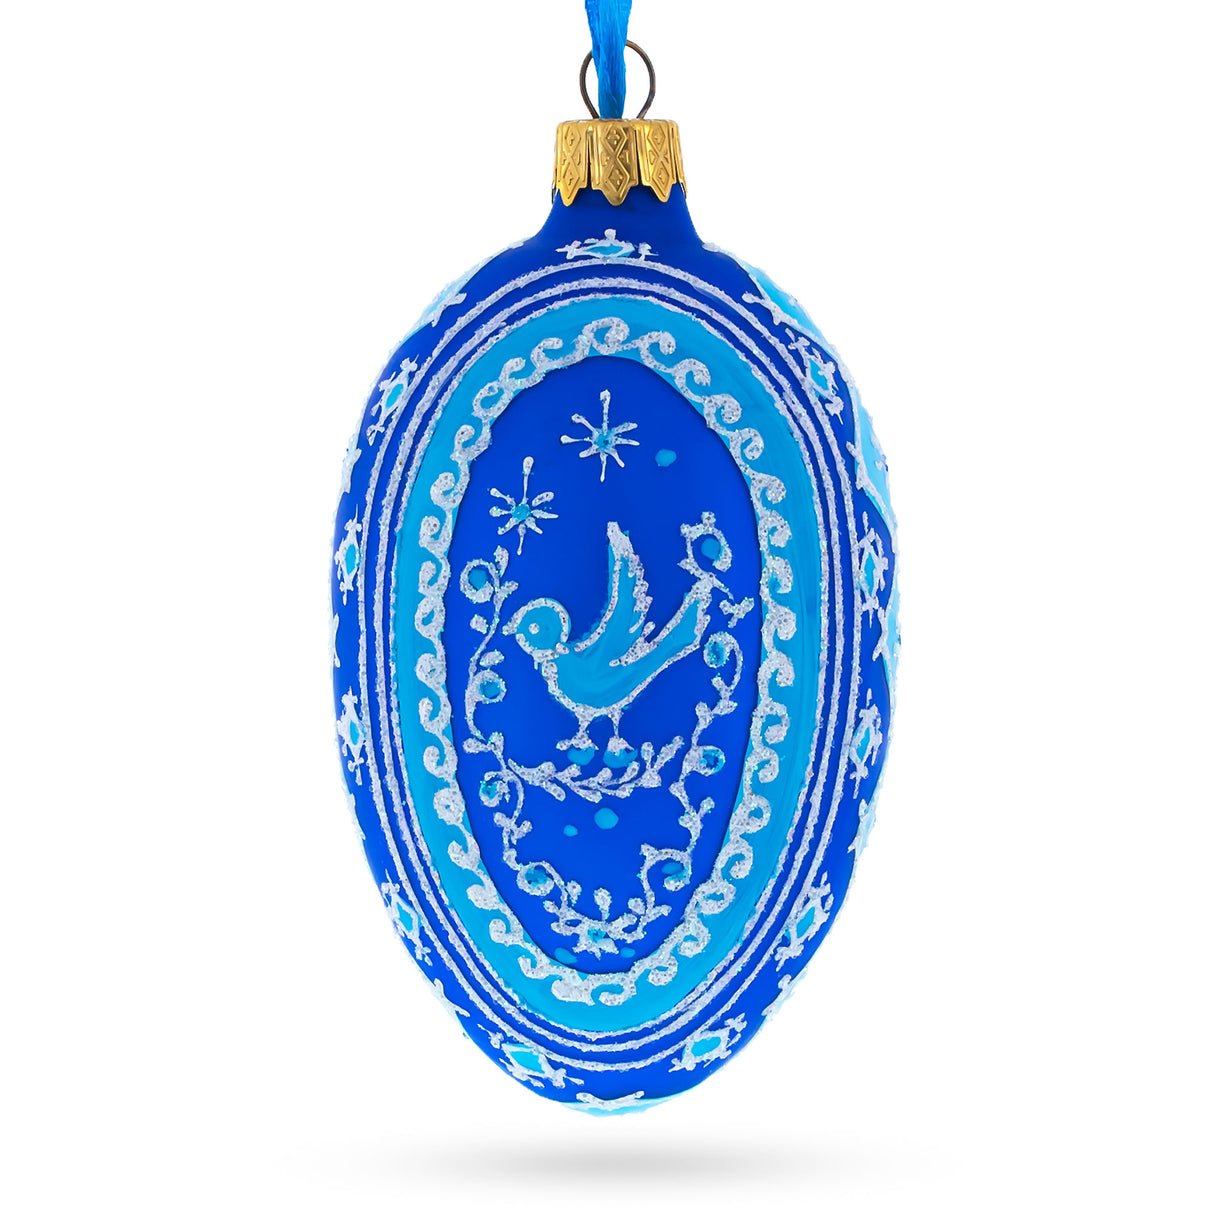 Glass Blue Bird Pysanka Egg Glass Ornament 4 Inches in Blue color Oval